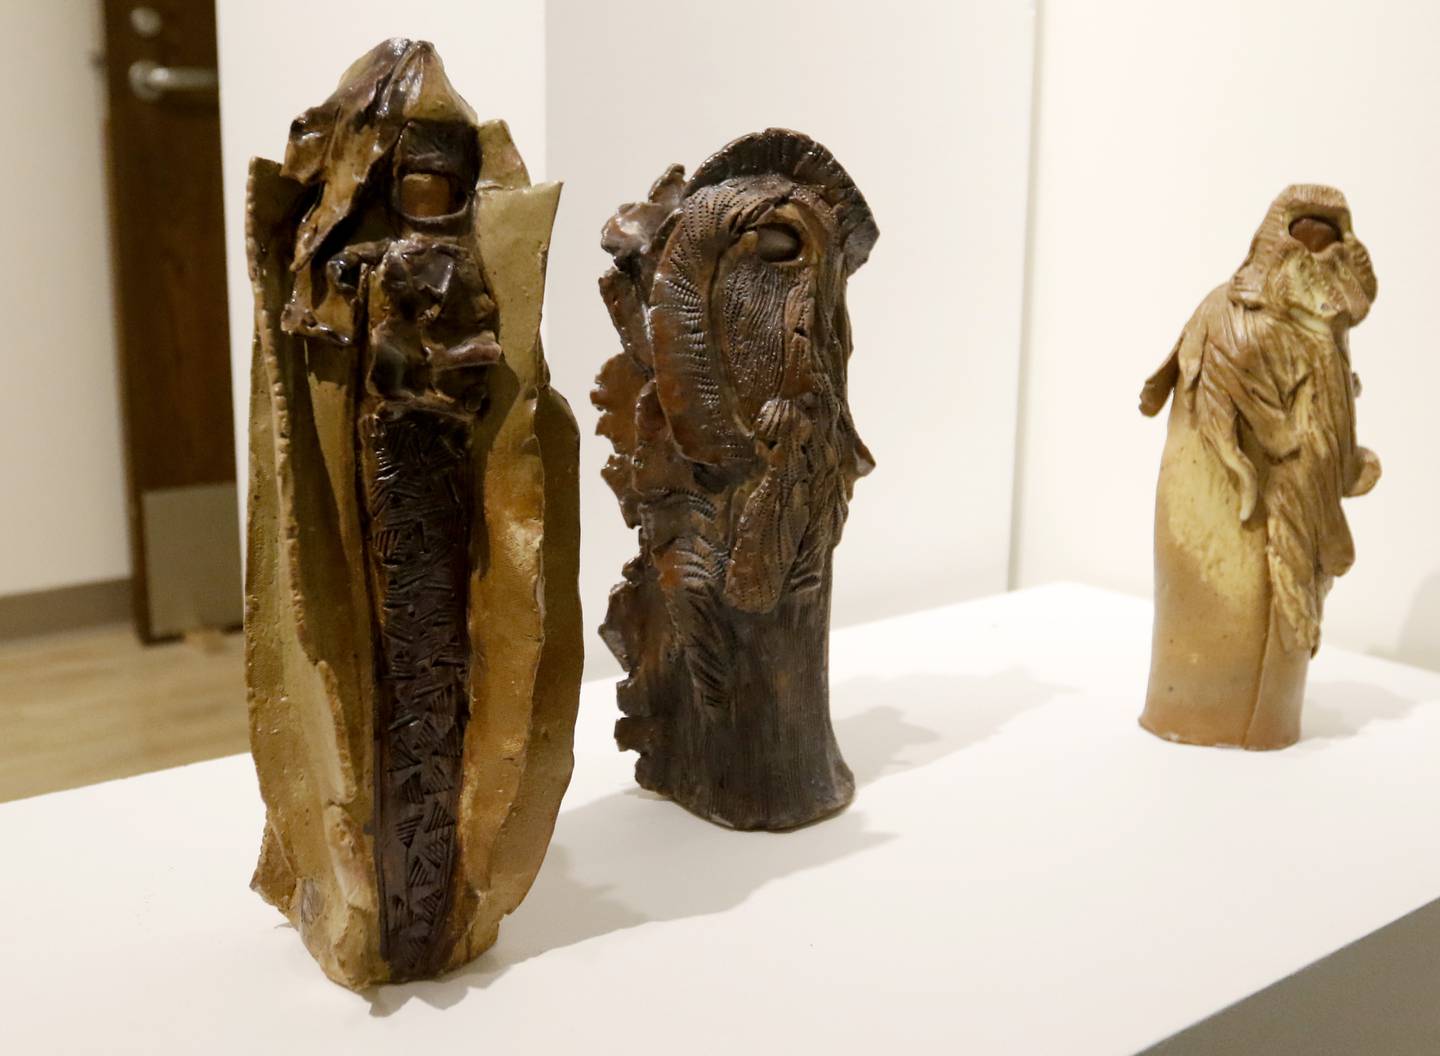 Ceramic activist art created by Elaine Kadakia, 83, a student at McHenry County College, is on display at the college gallery through Monday, September 19, 2022.